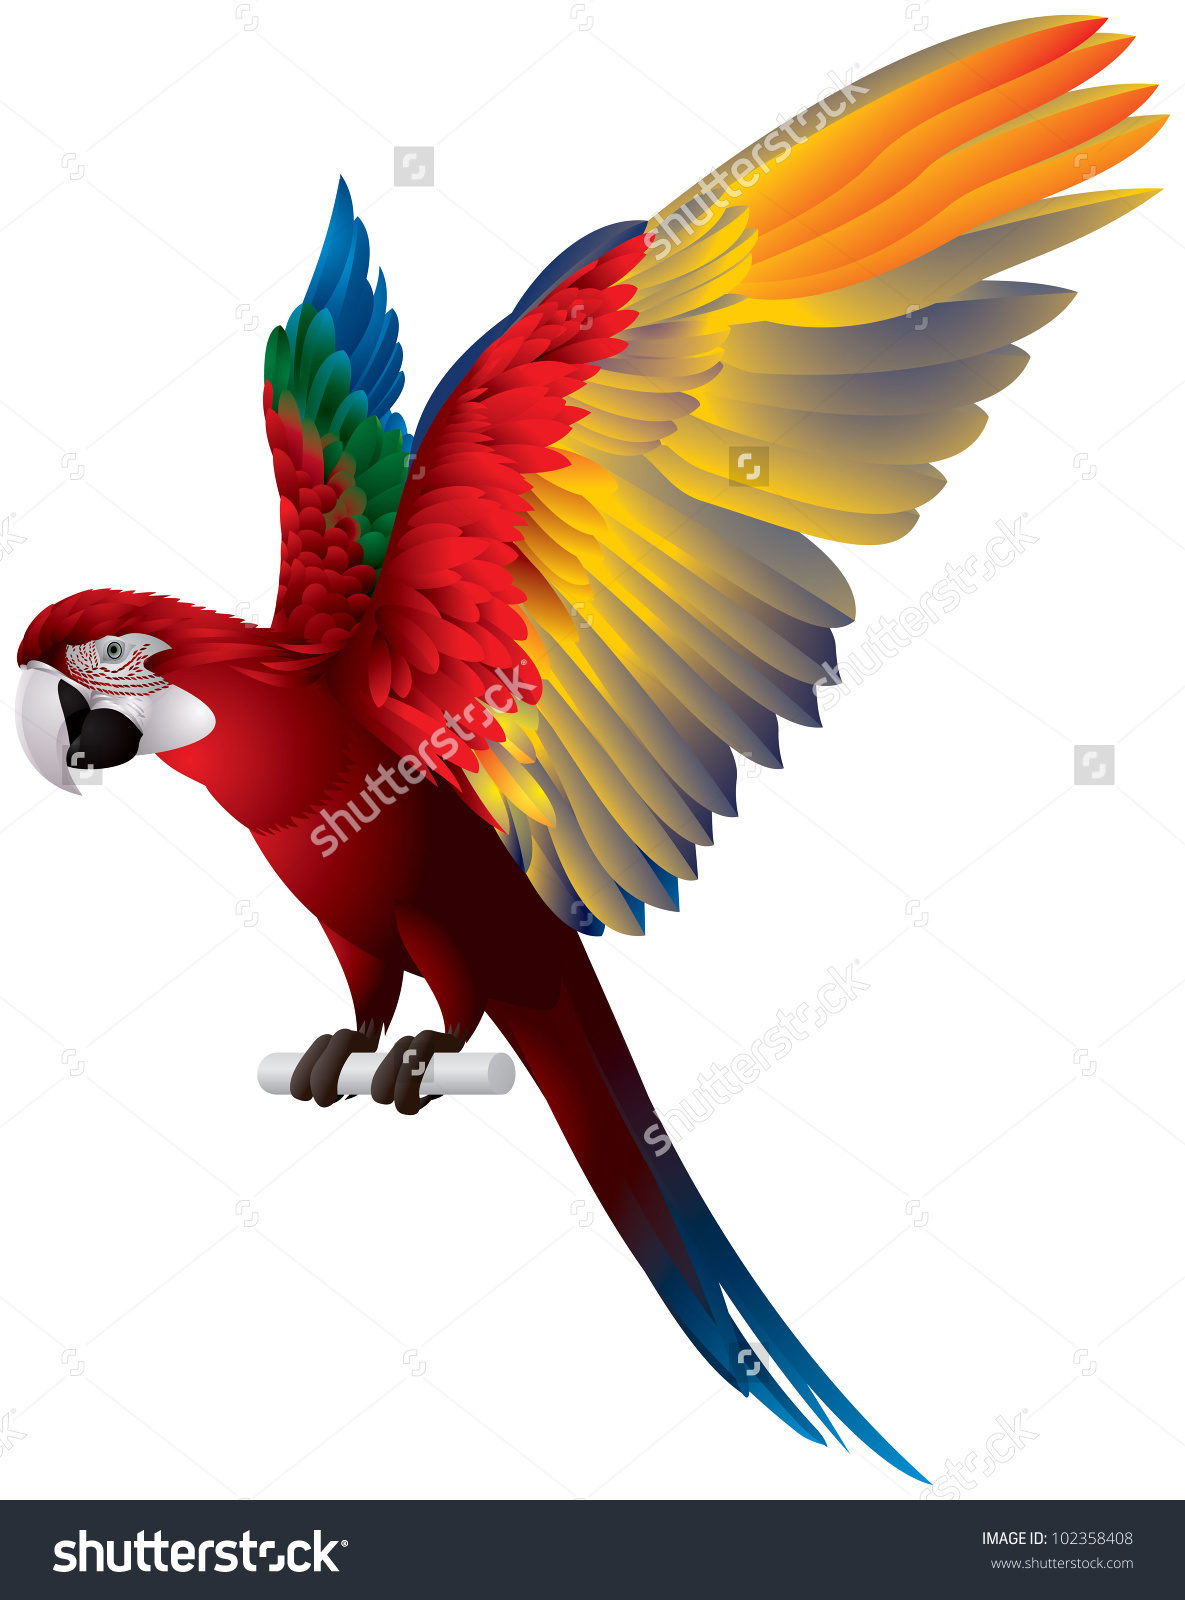 Red-and-green Macaw HD wallpapers, Desktop wallpaper - most viewed